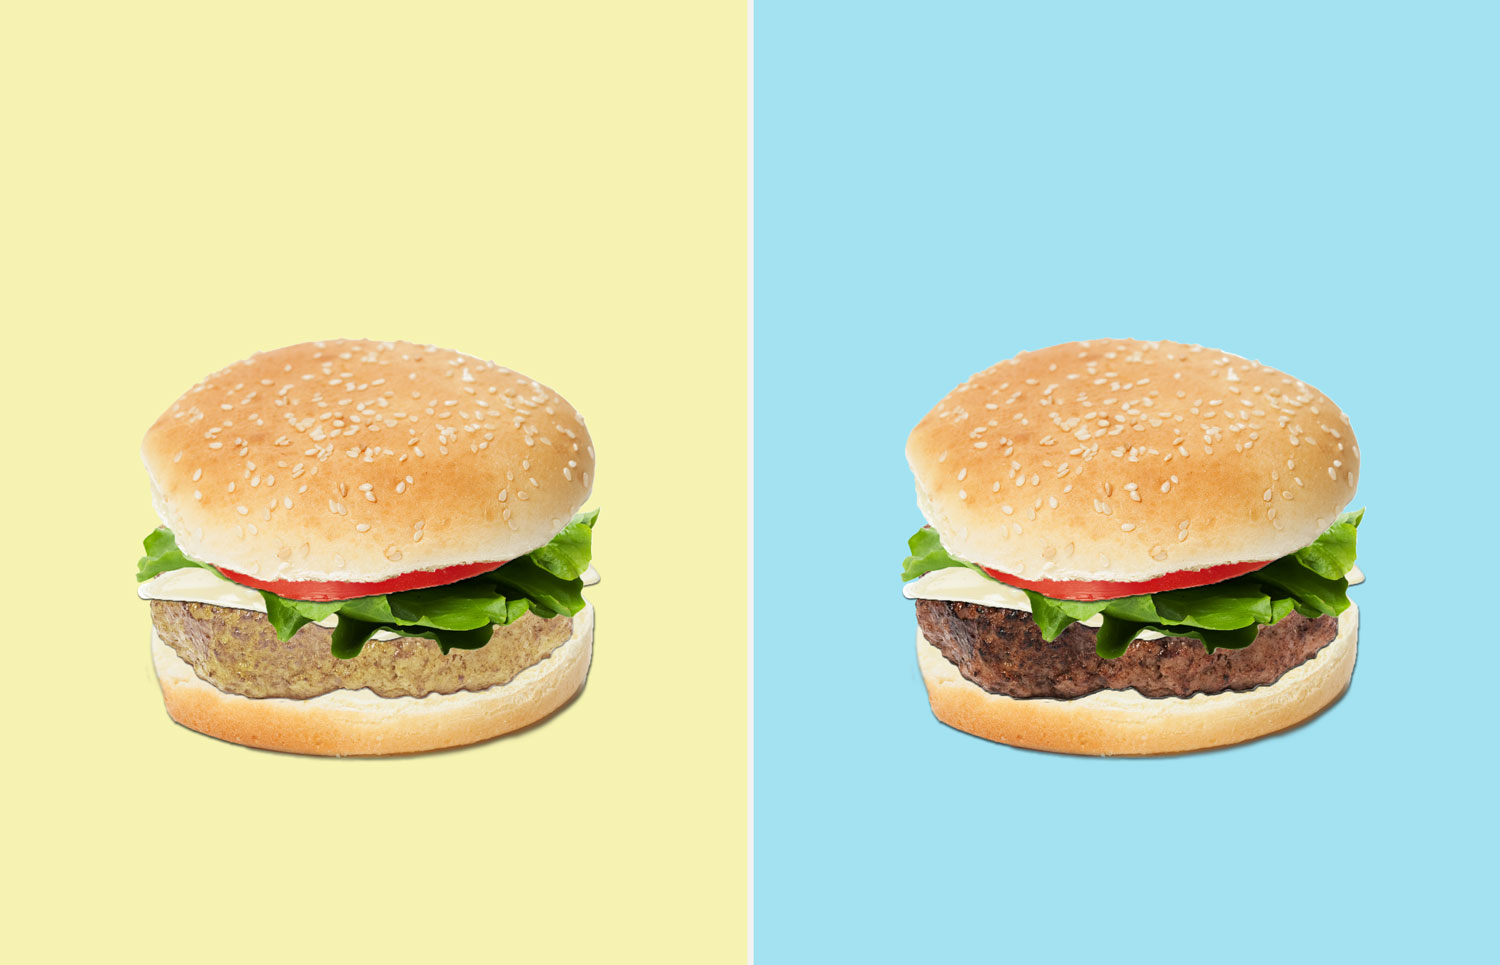 Which is better for you: A sirloin burger or a turkey burger?